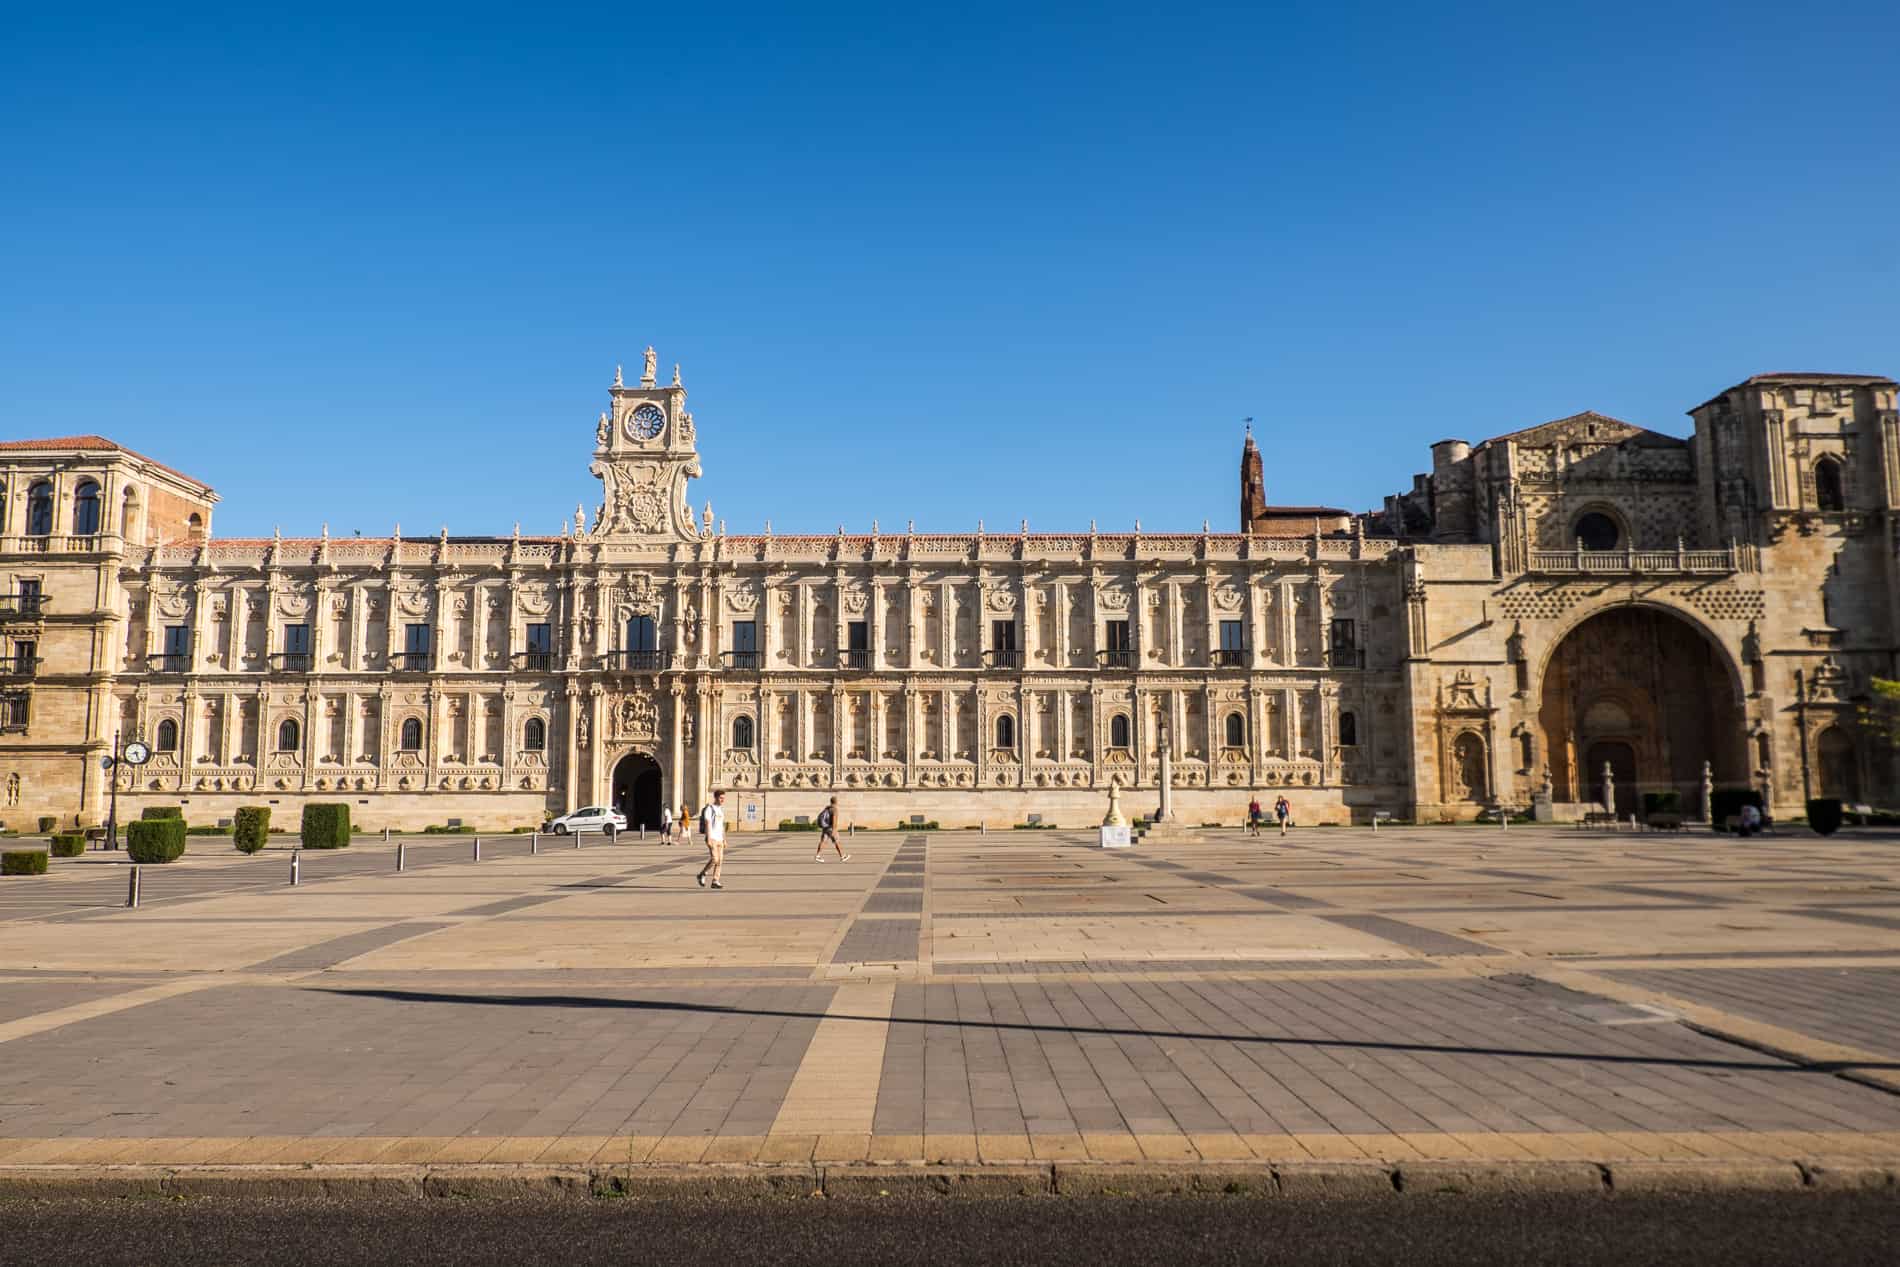 A long building with intricate carvings and a chapel on the right end; the Spanish Renaissance monument of Hostel de San Marcos Parador de León.